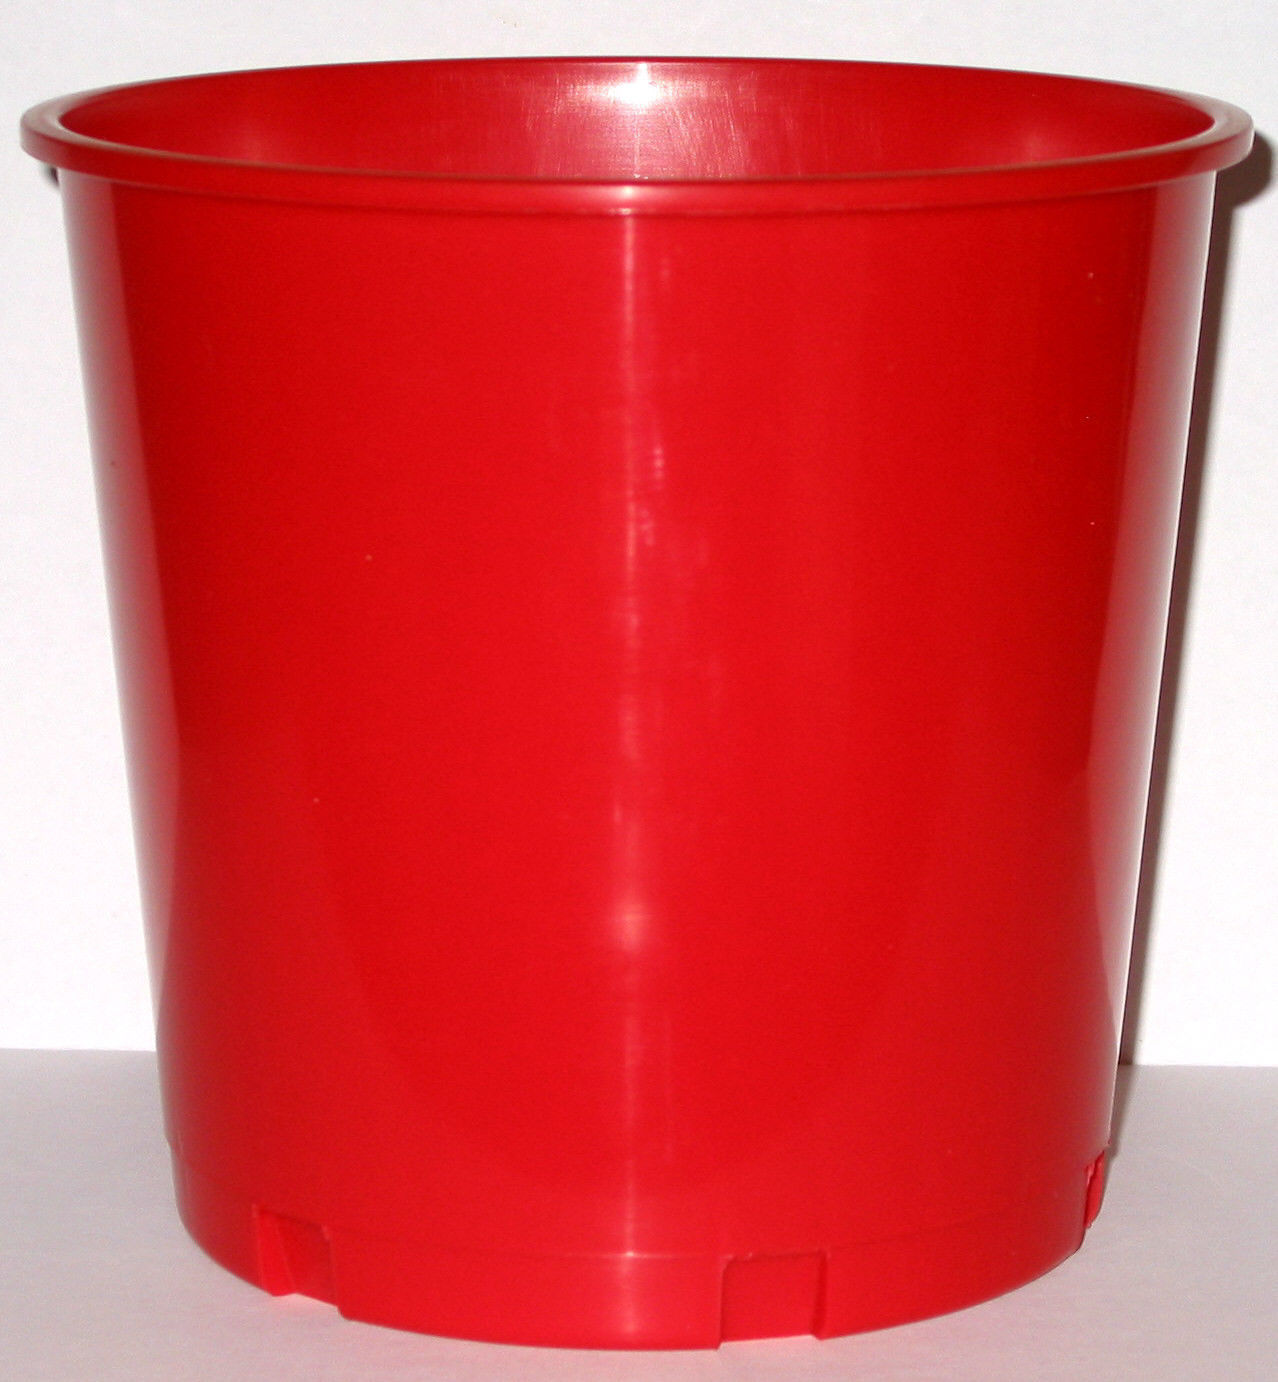 1 RED 1 BLACK OFFERING OR ICE BUCKETS MADE USA HOLDS 176 OUNCES LEAD FREE NO BPA 